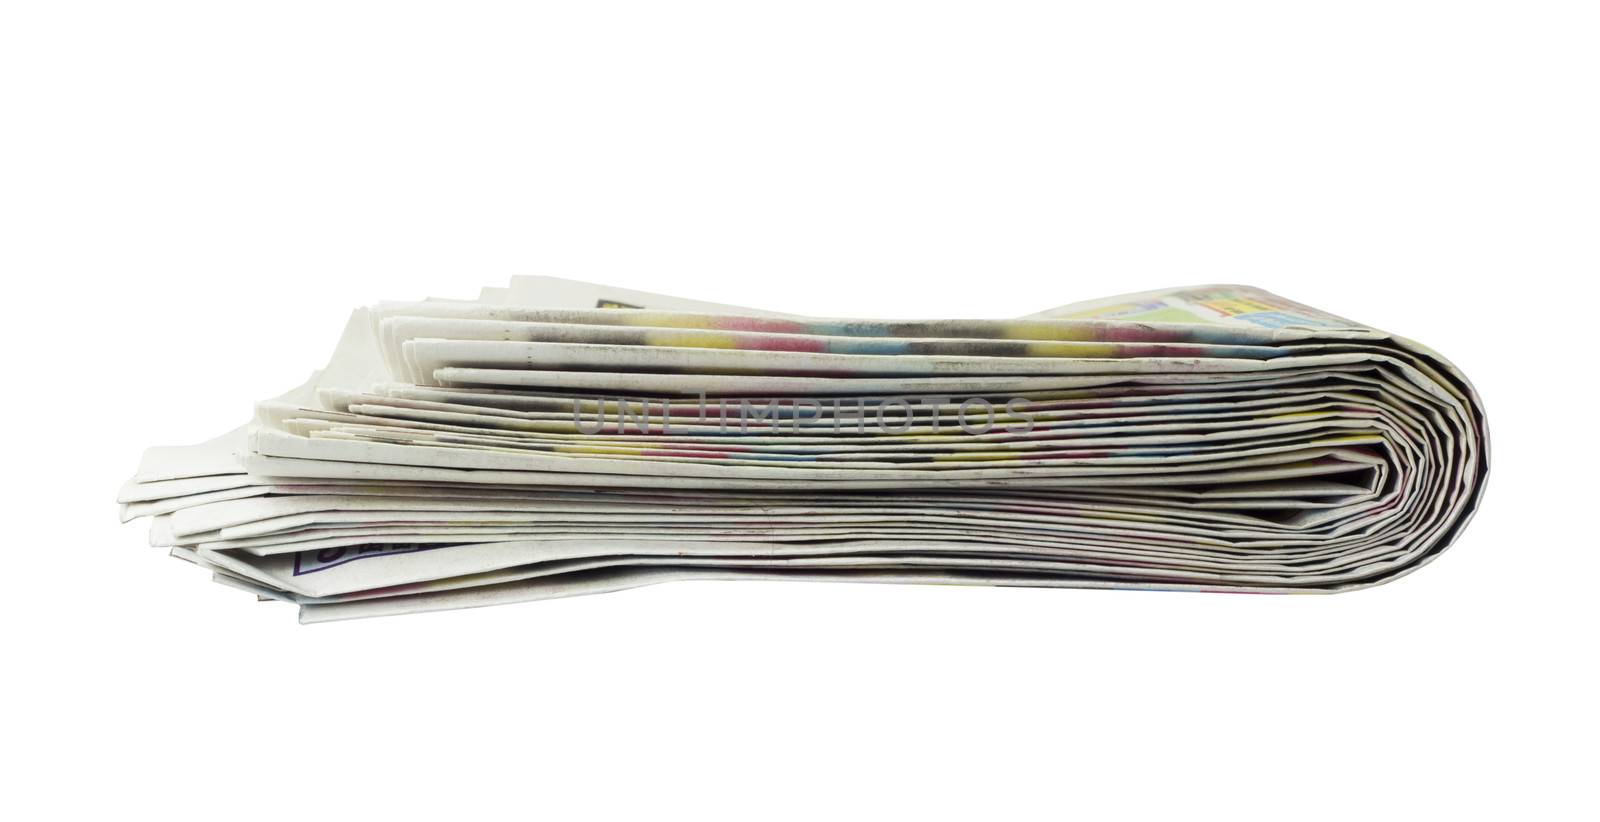 Stack of newspapers by cherezoff